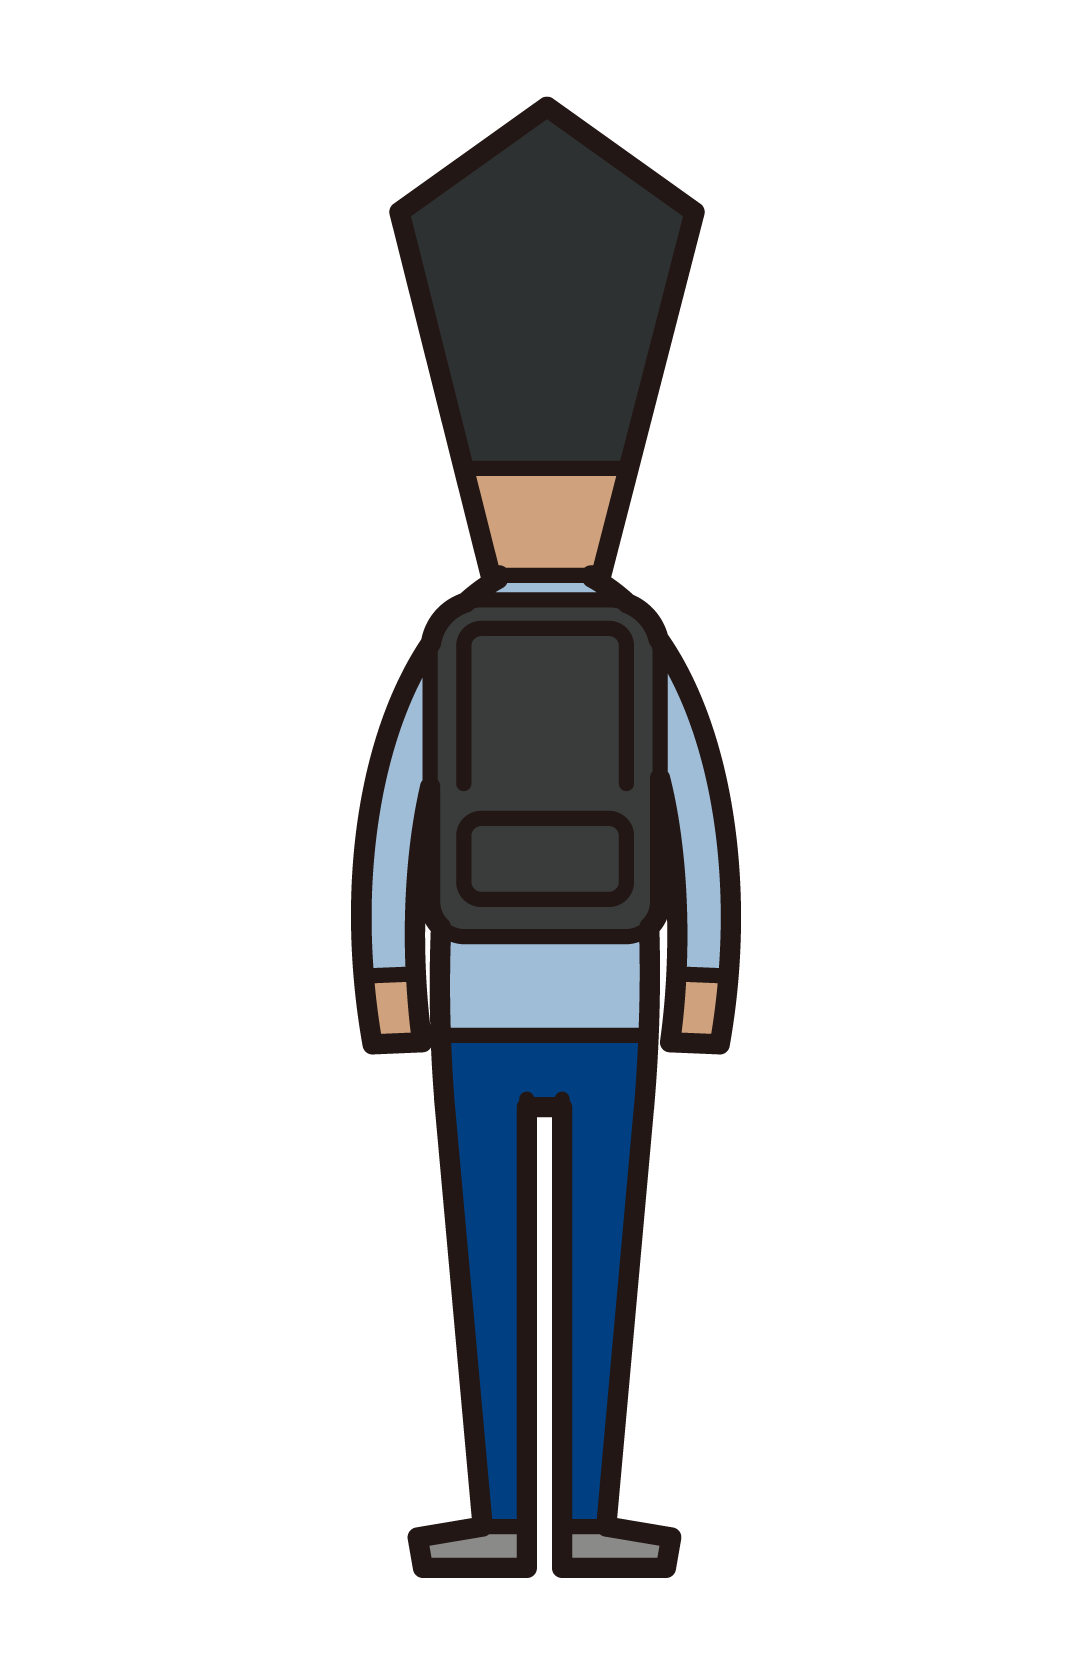 Illustration of the back of a man carrying a rucksack